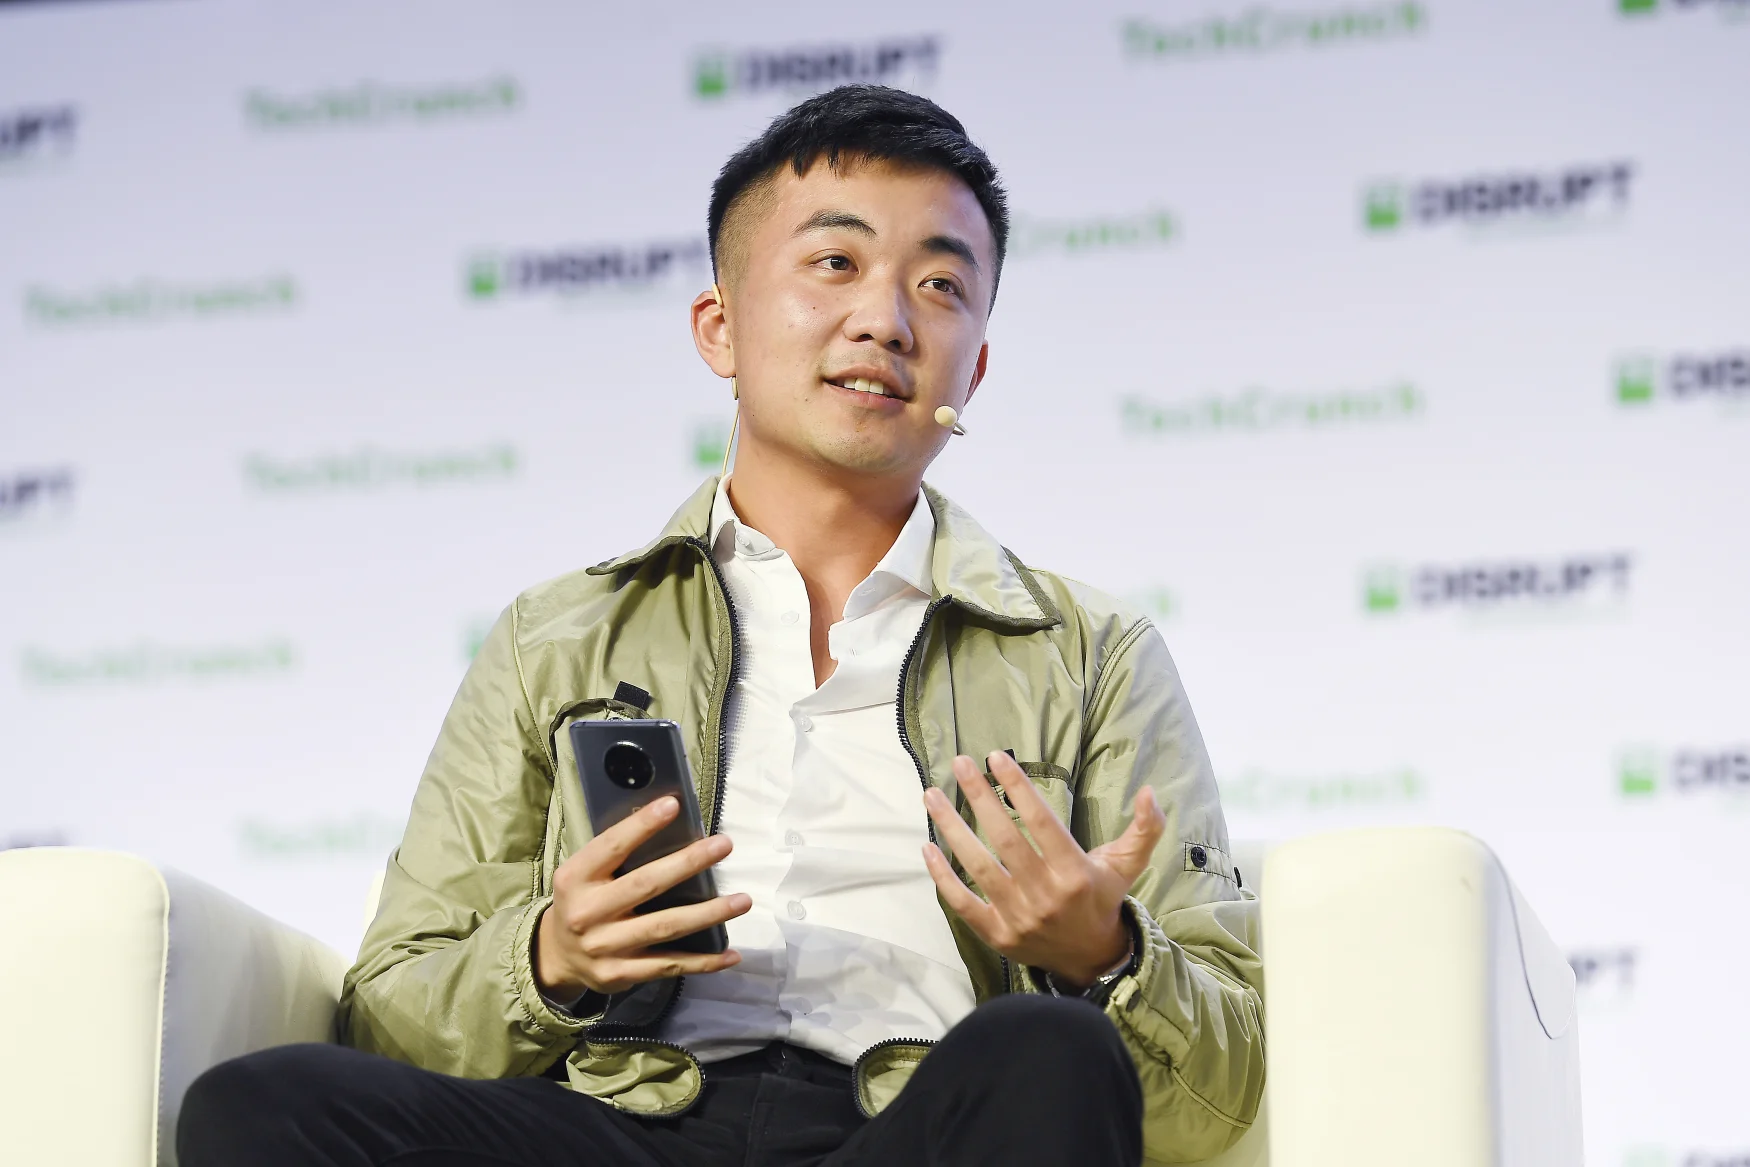 SAN FRANCISCO, CALIFORNIA - OCTOBER 04: OnePlus Co-founder Carl Pei speaks onstage during TechCrunch Disrupt San Francisco 2019 at Moscone Convention Center on October 04, 2019 in San Francisco, California. (Photo by Steve Jennings/Getty Images for TechCrunch)